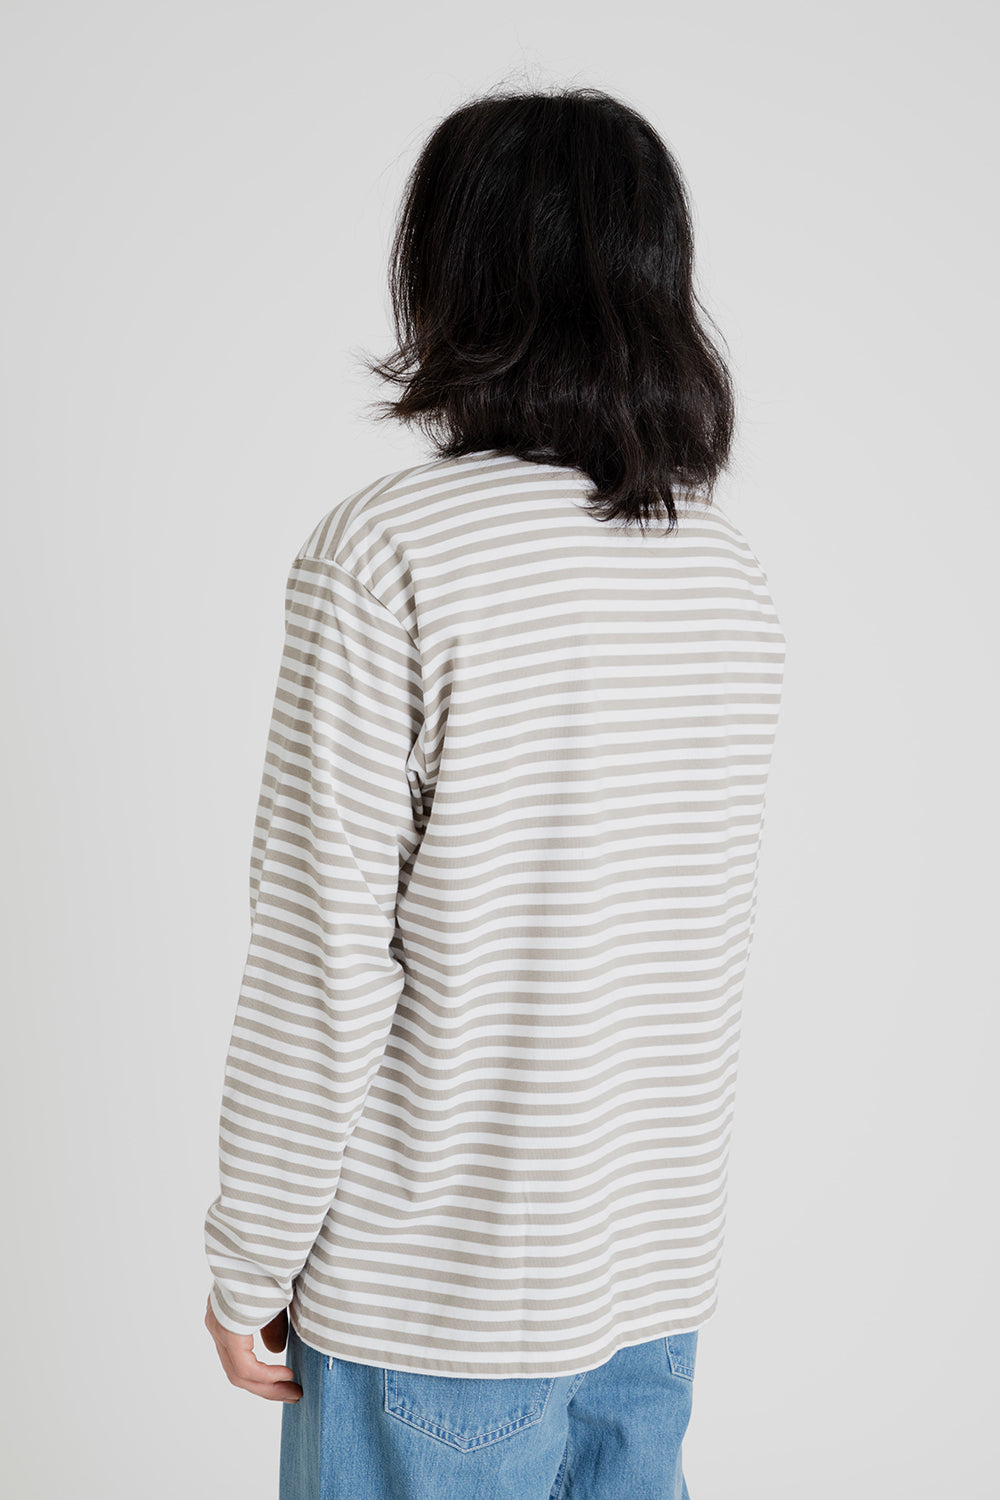 Nanamica Coolmax St Jersey Long Sleeve Tee in Taupe and White